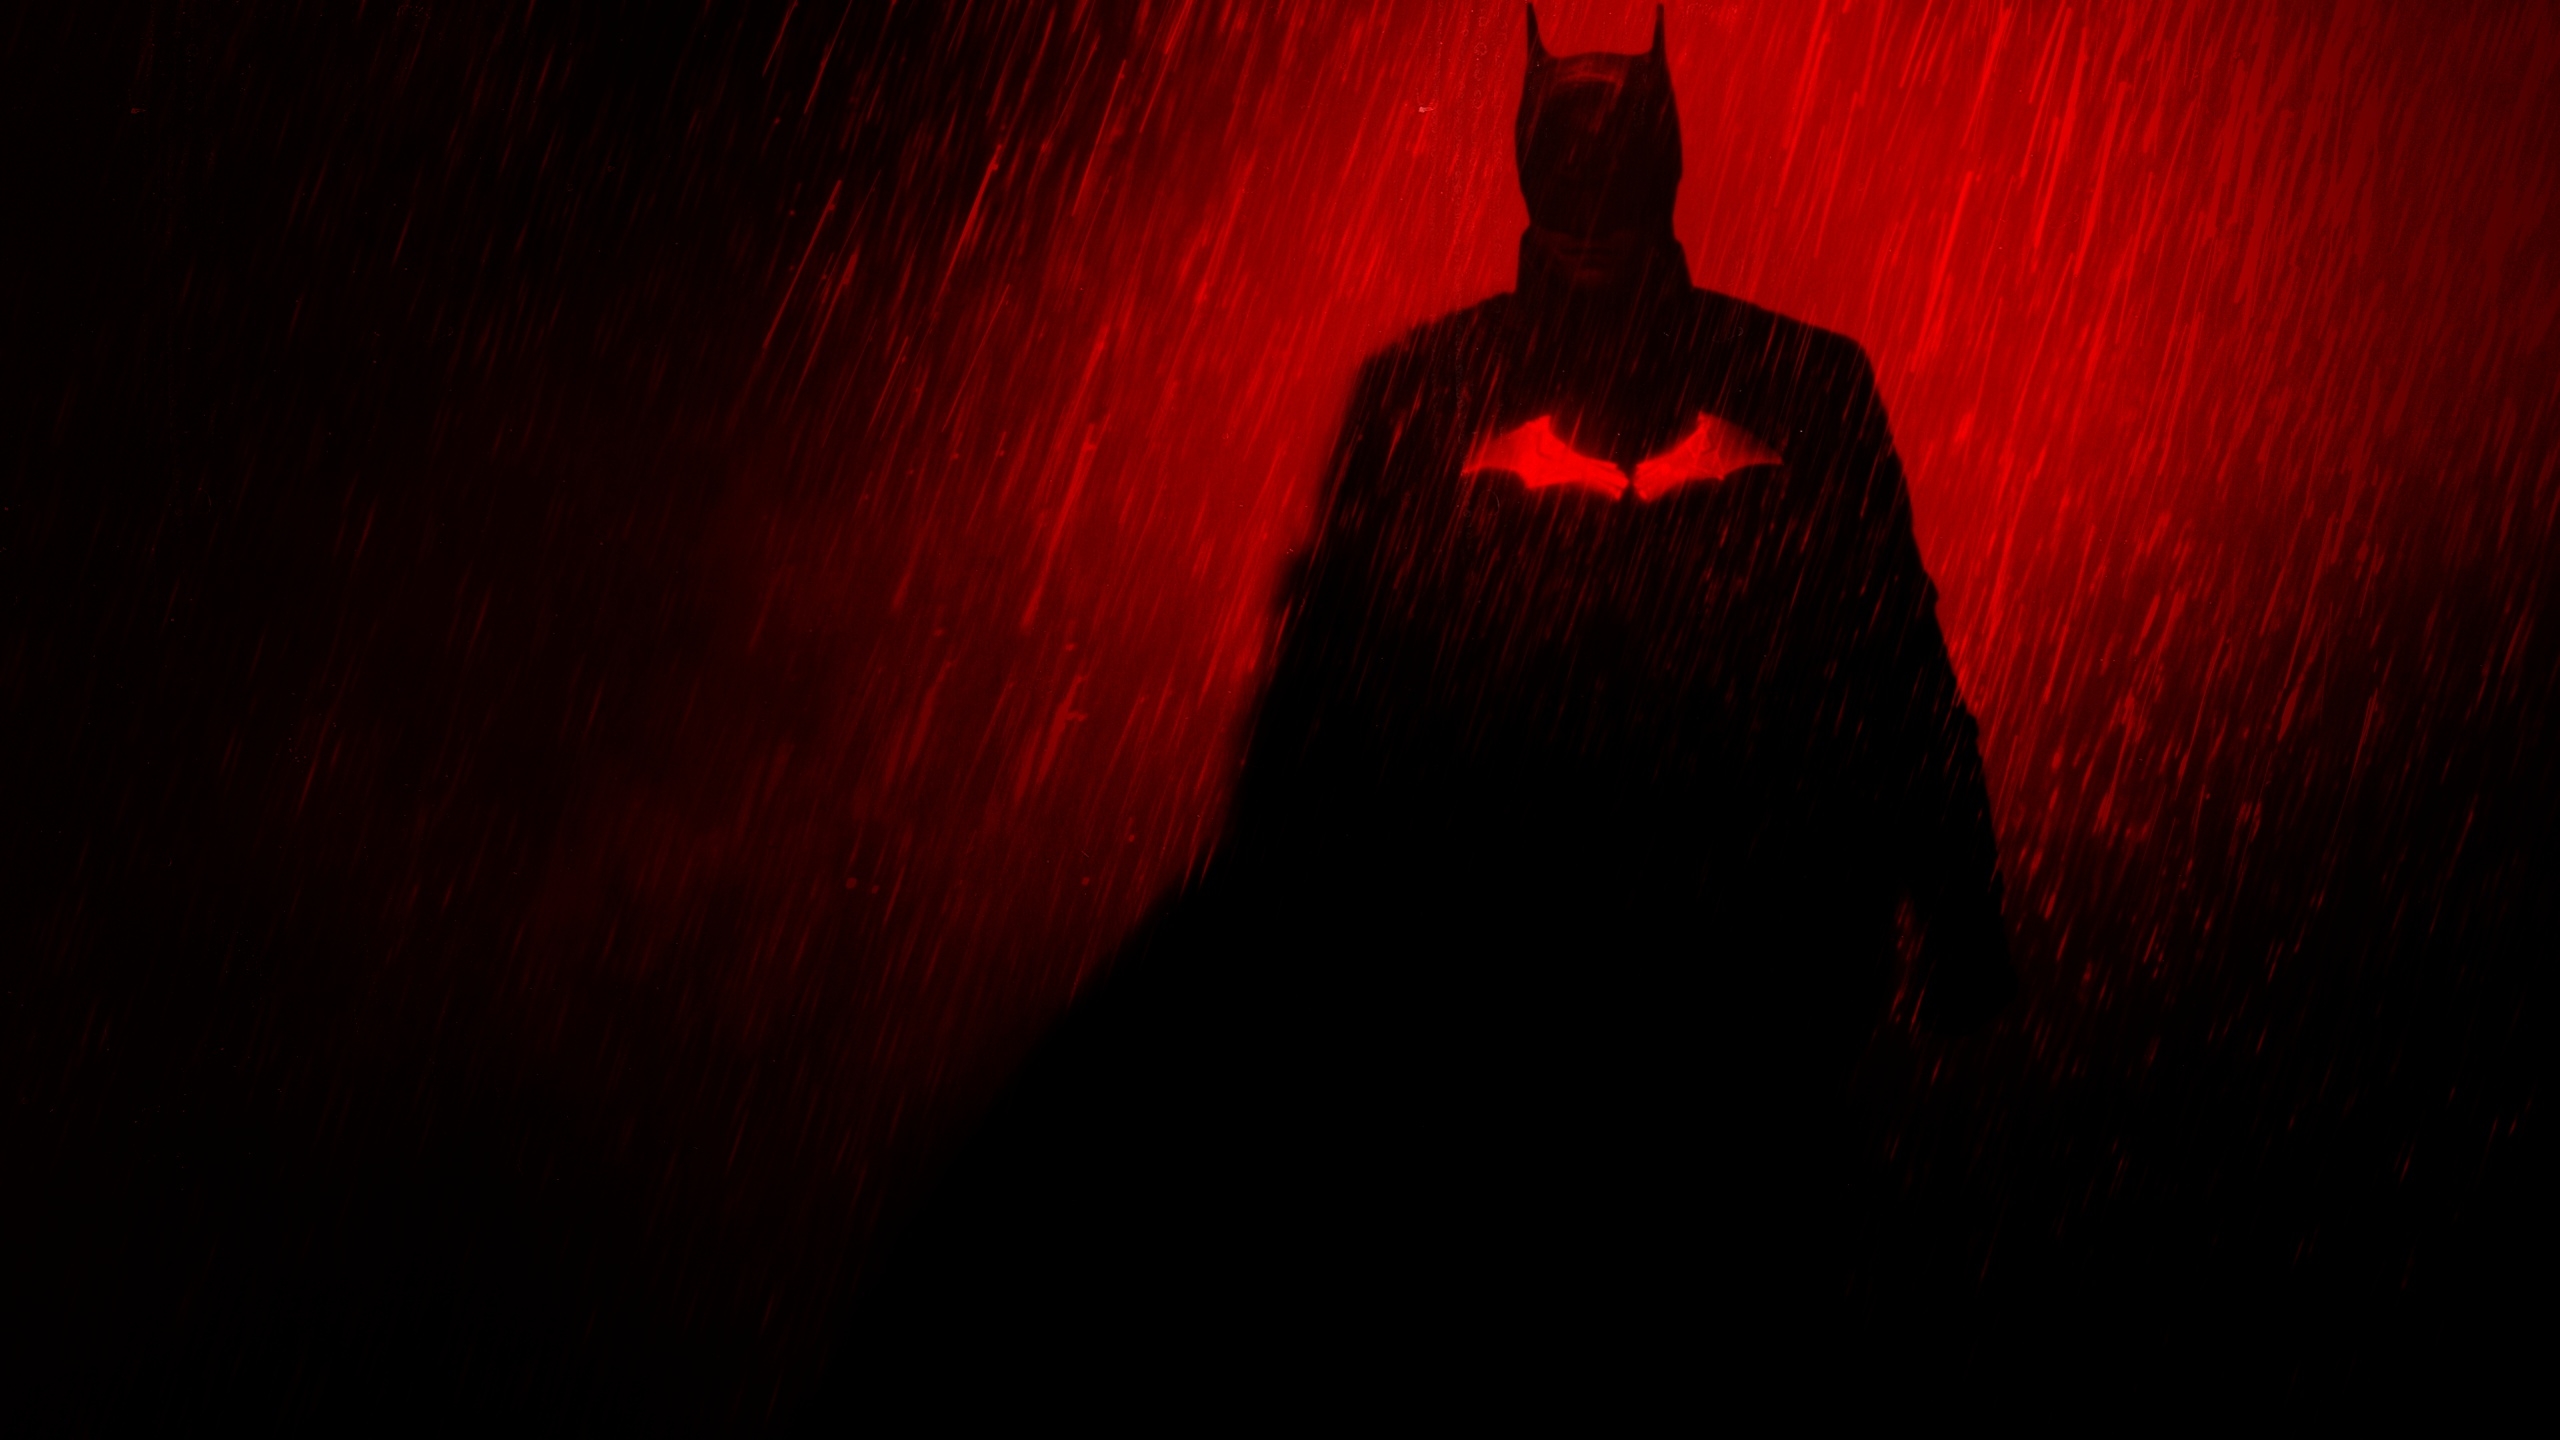 Batman with Vignette 3840x2160202199 Resolution Wallpaper, HD Movies 4K Wallpaper, Image, Photo and Background